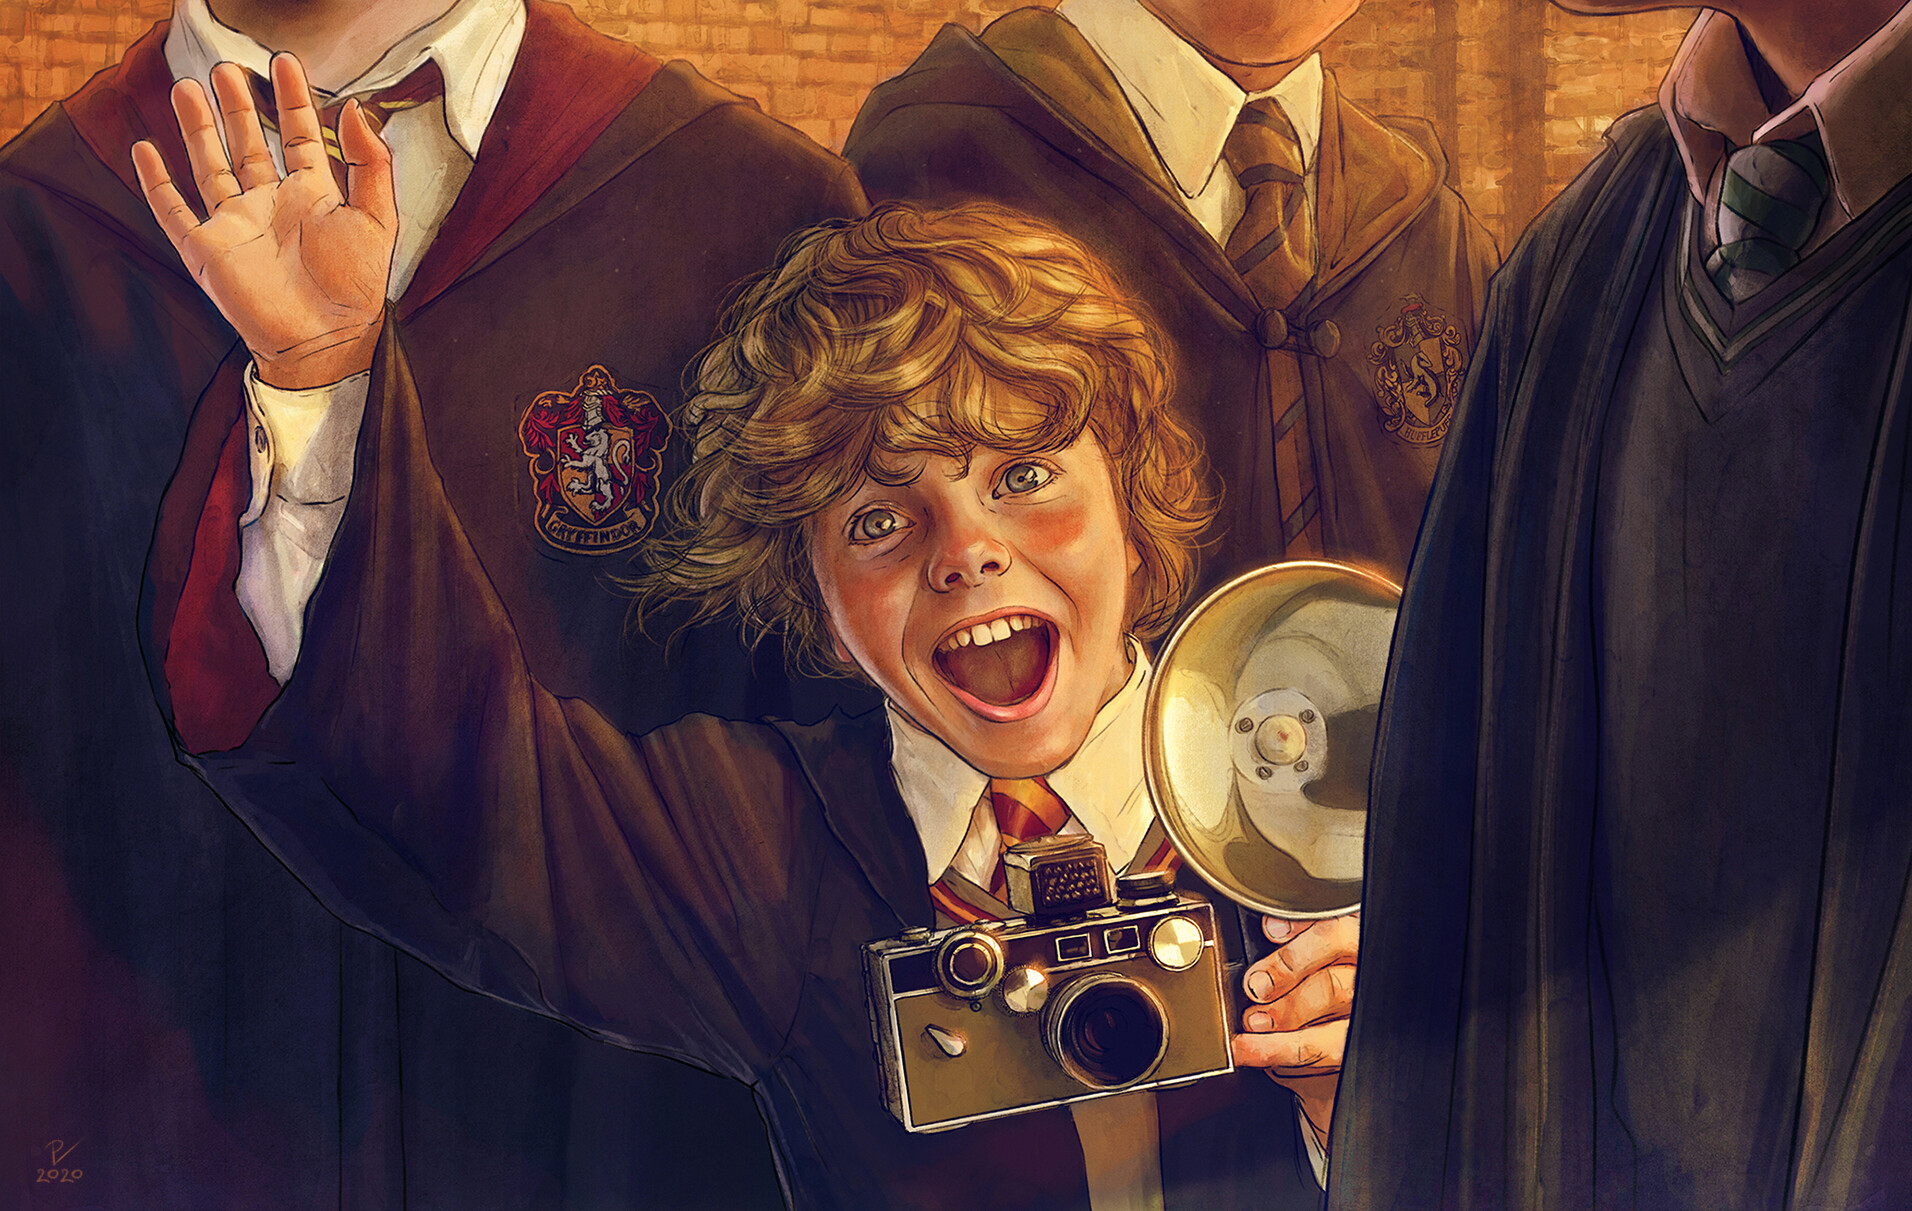 Harry Potter and the Chamber of Secrets Art